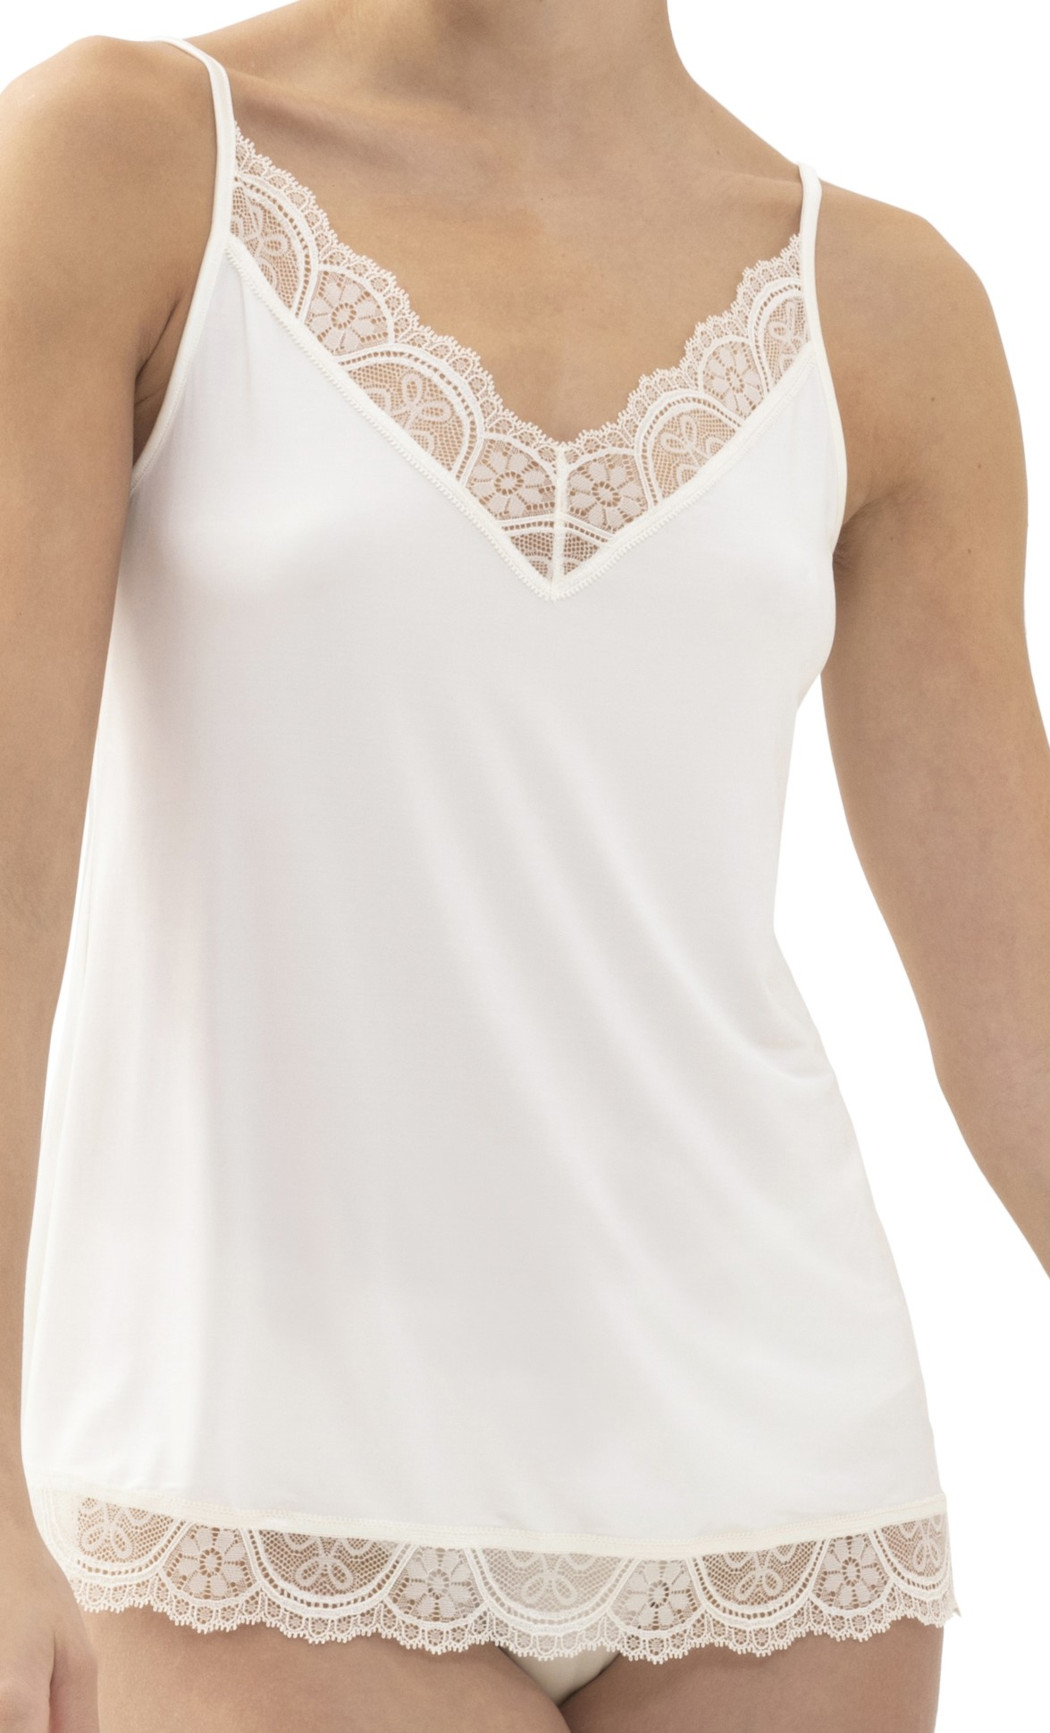 Mey Serie Poetry Fame Damen Camisole